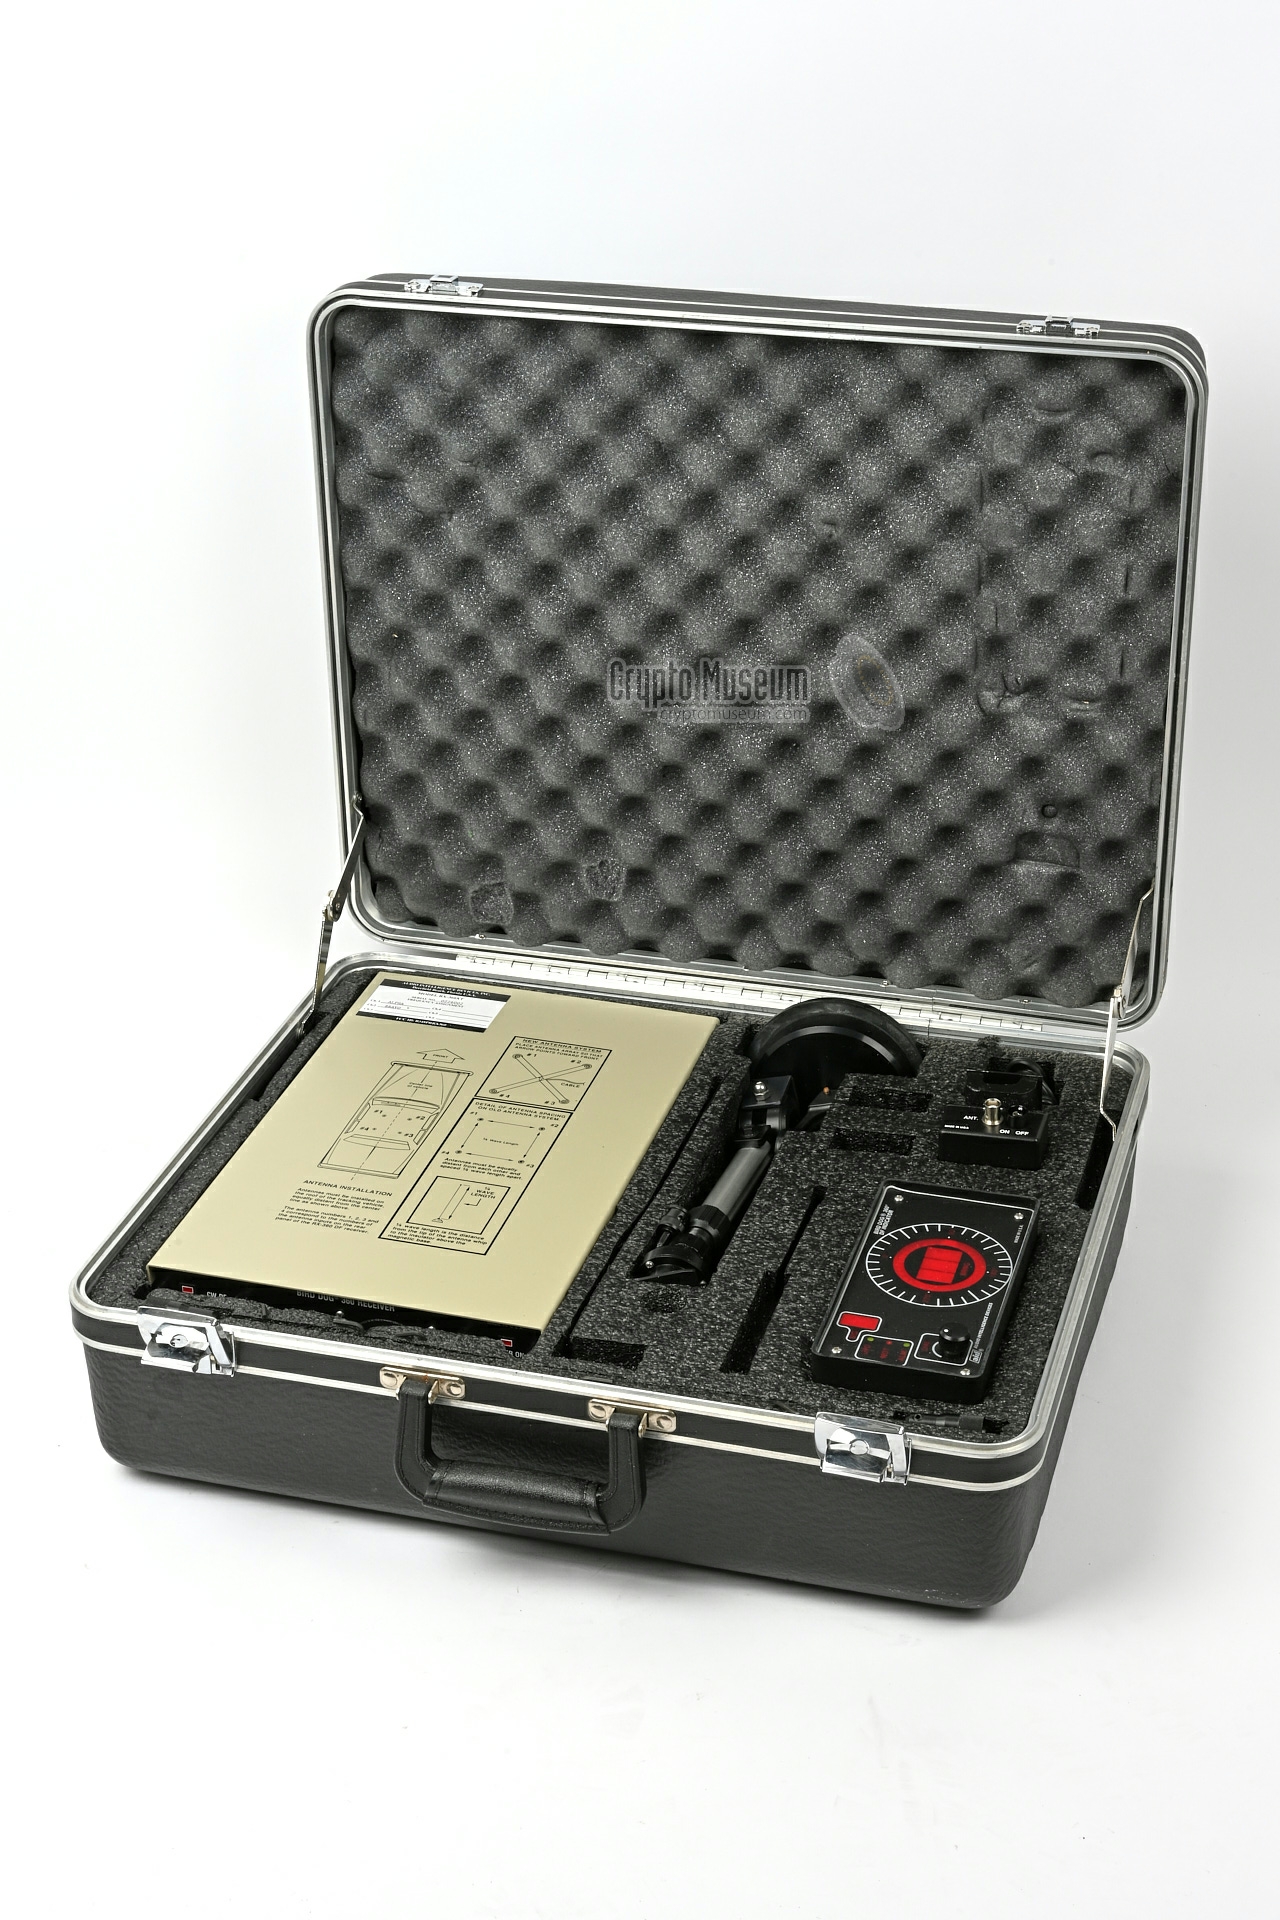 Bird Dog 360TX tracking system in suitcase